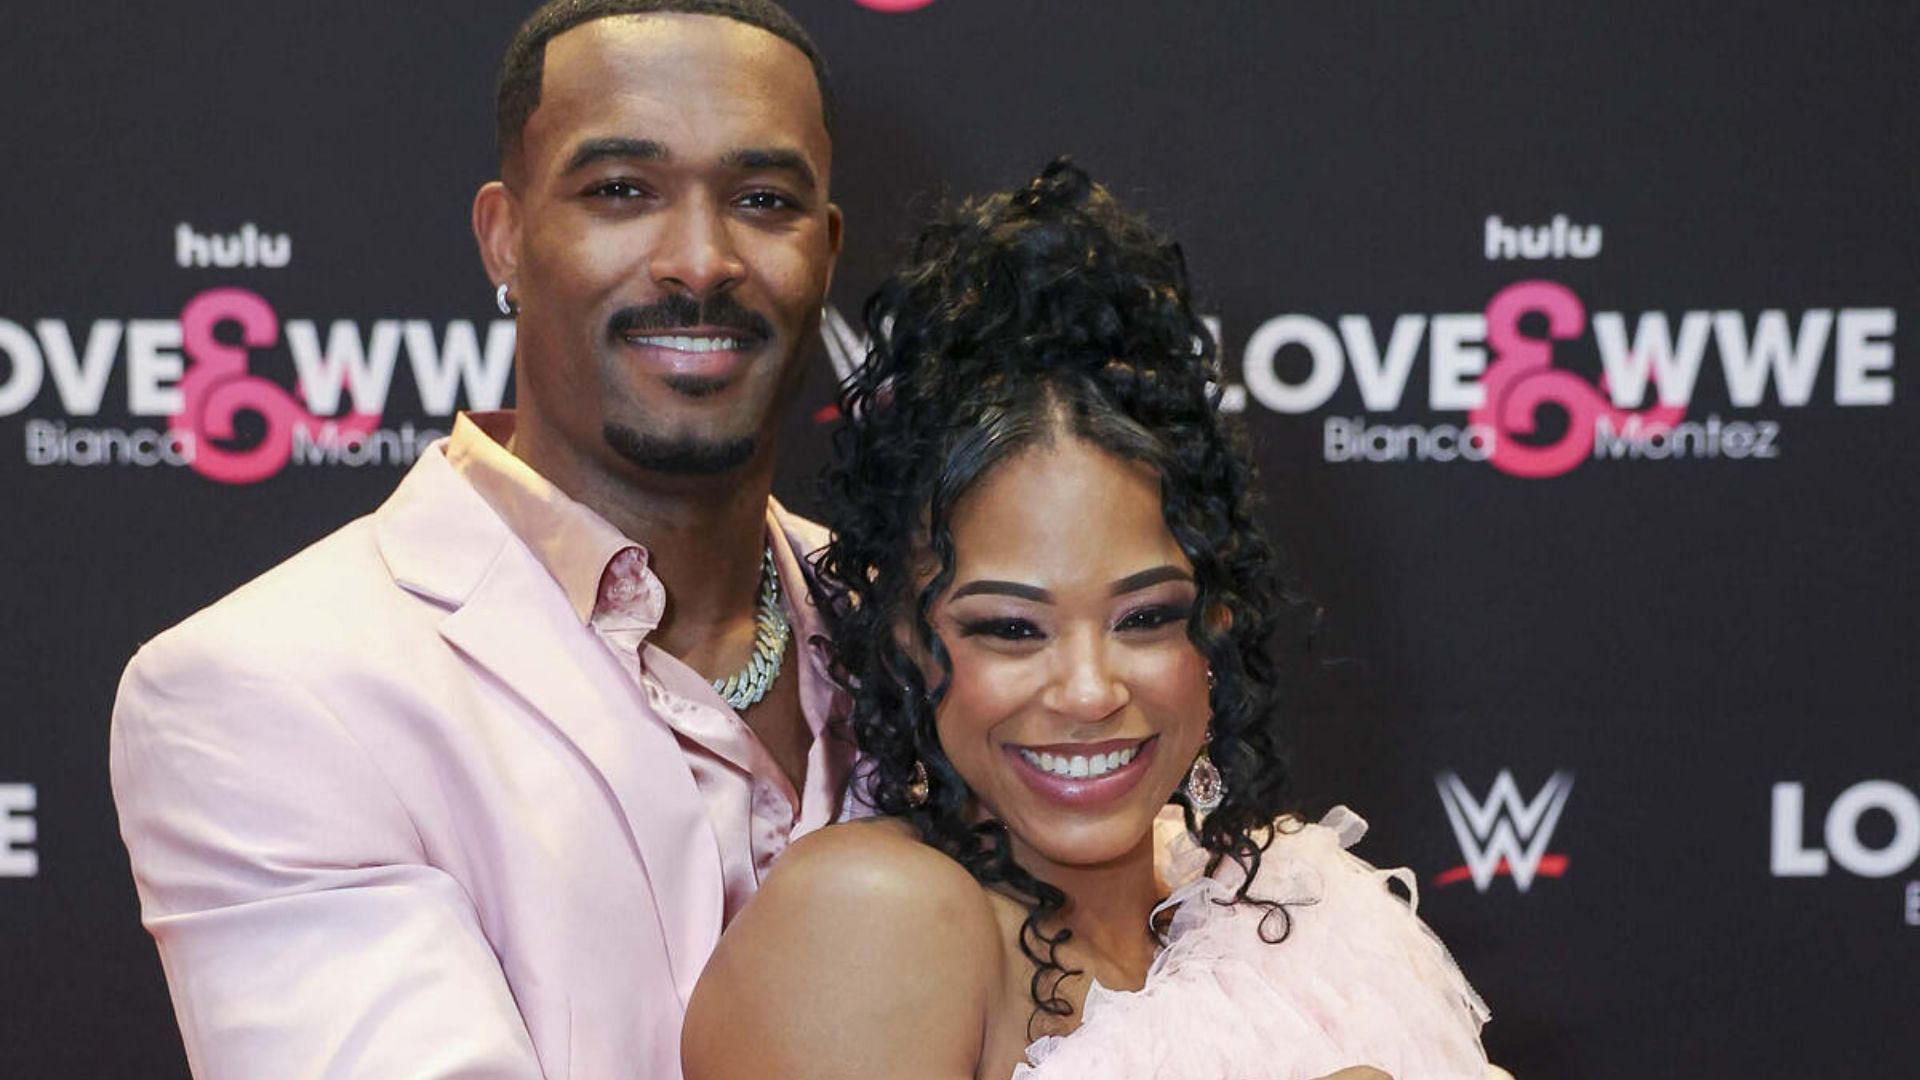 Montez Ford and Bianca Belair at the premiere of Love &amp; WWE